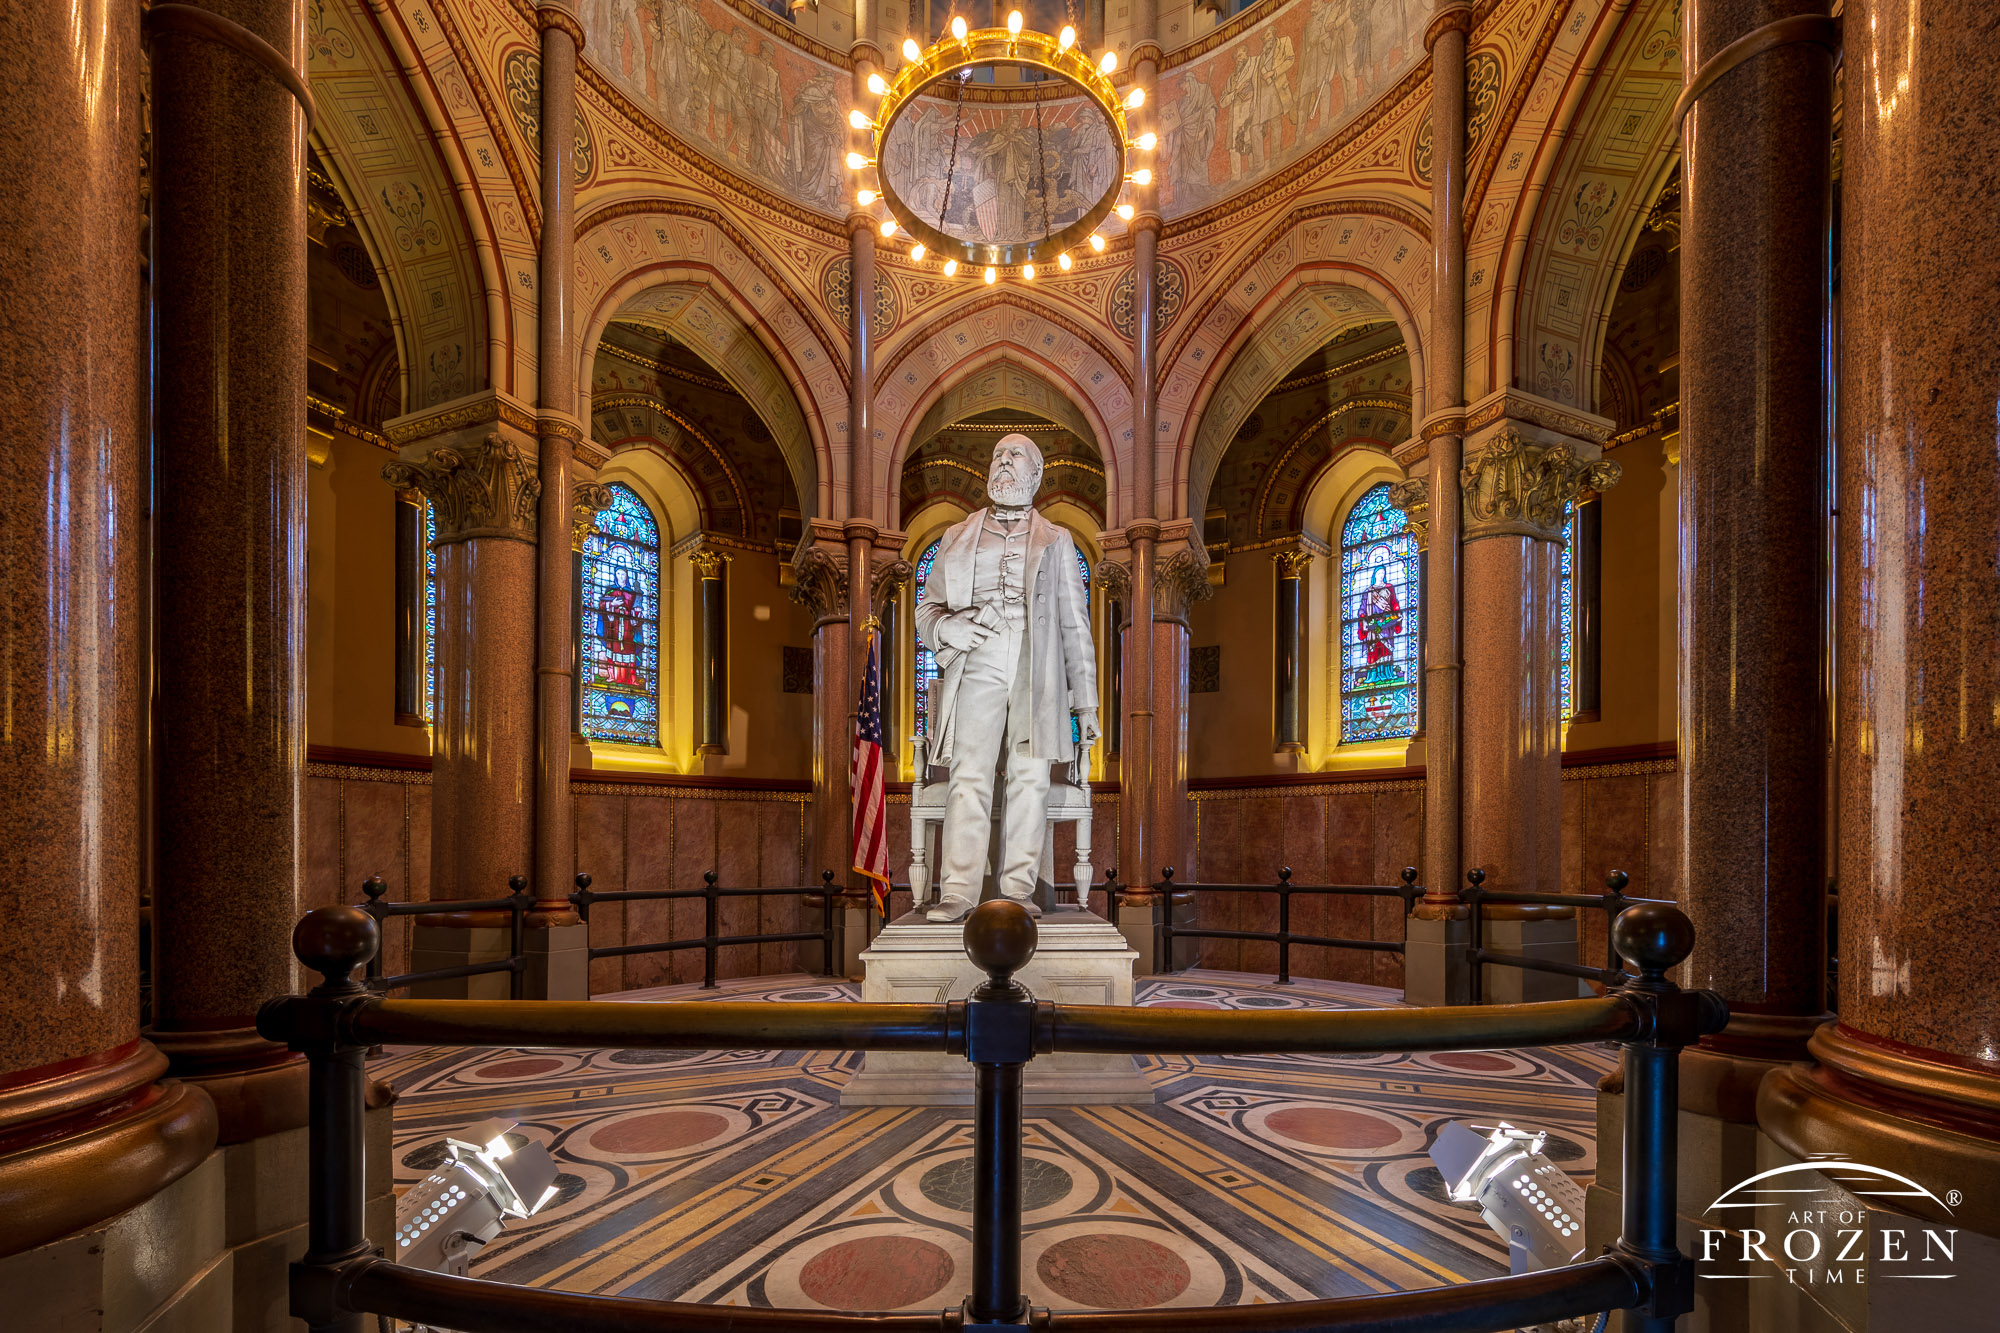 Upper chamber of President Garfield’s mausoleum where a white marble statue of the President stands in the midst of a rotunda with stained-glass windows.